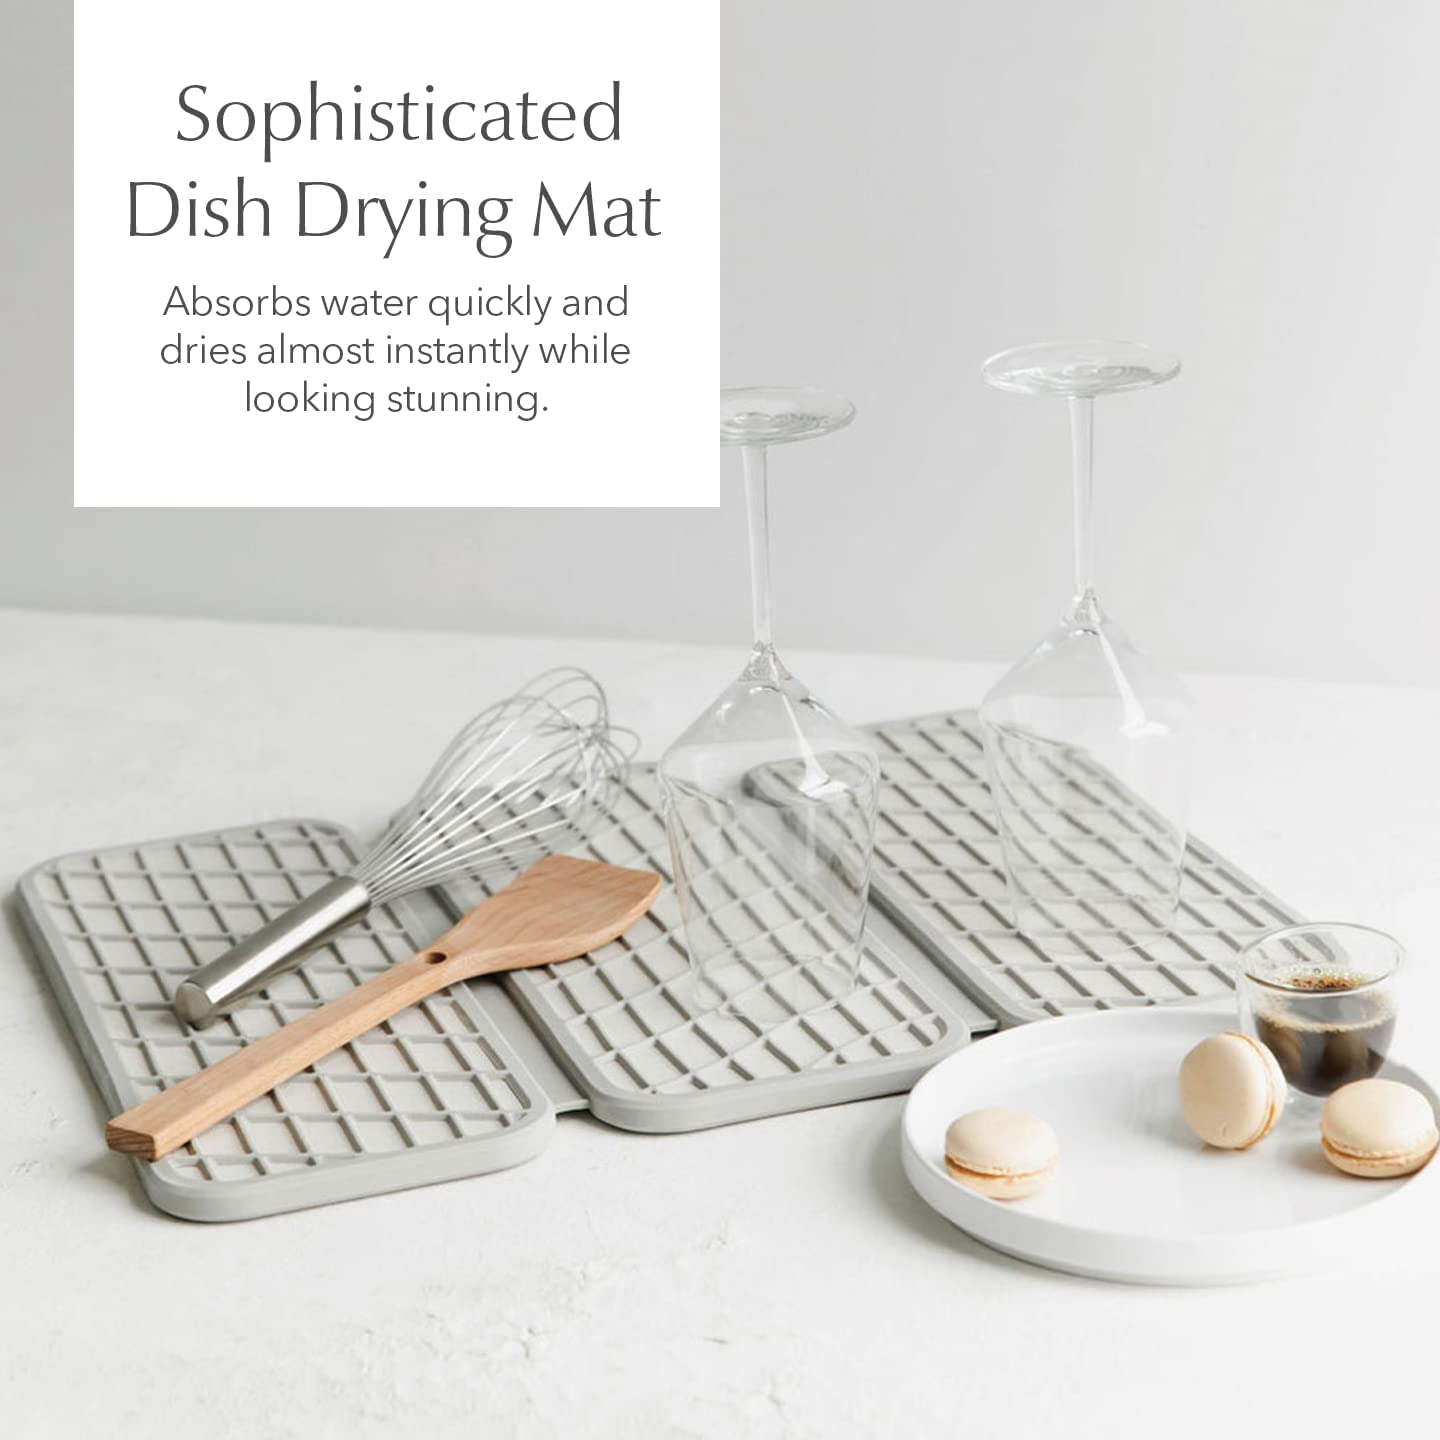 Con-Tact Brand - Replace that dish towel and air dry your dishes with  Con-Tact Brand dish drying mat. Made from a durable and absorbent material,  the mat provides a sturdy base for